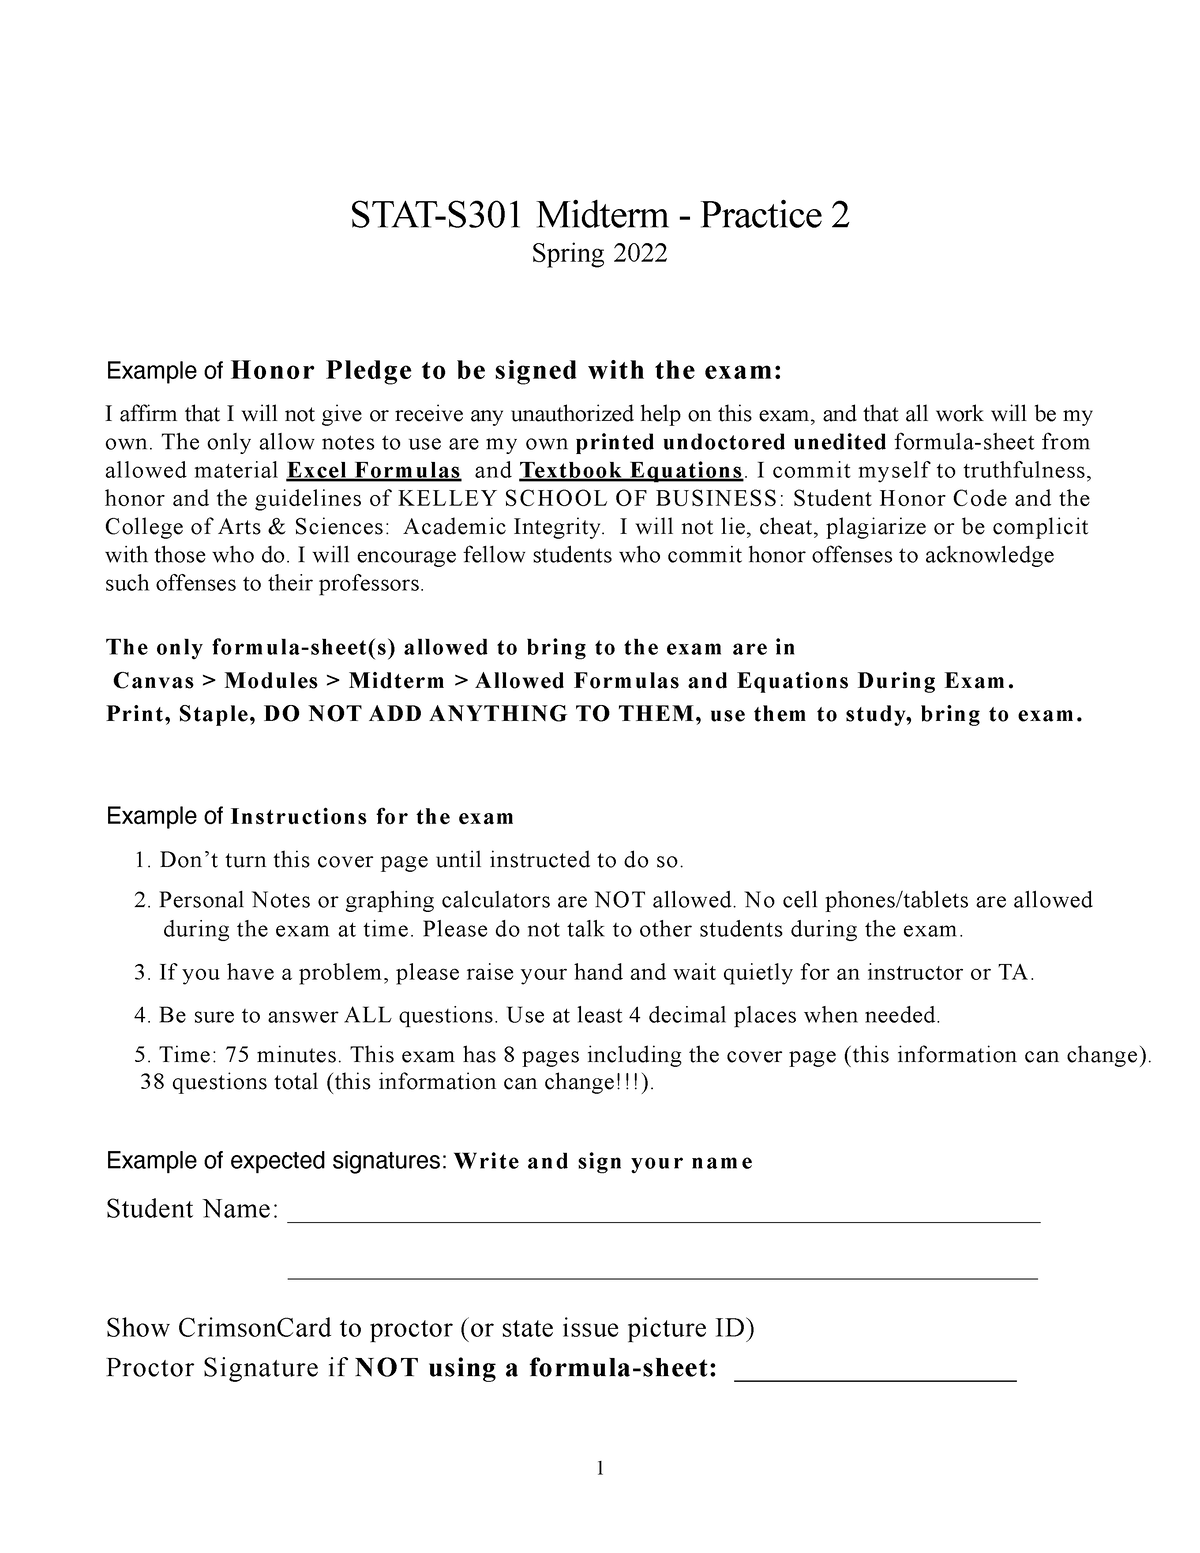 Midterm 1Practice 2 - Example of Honor Pledge to be signed with the exam: I  affirm that I will not - Studocu